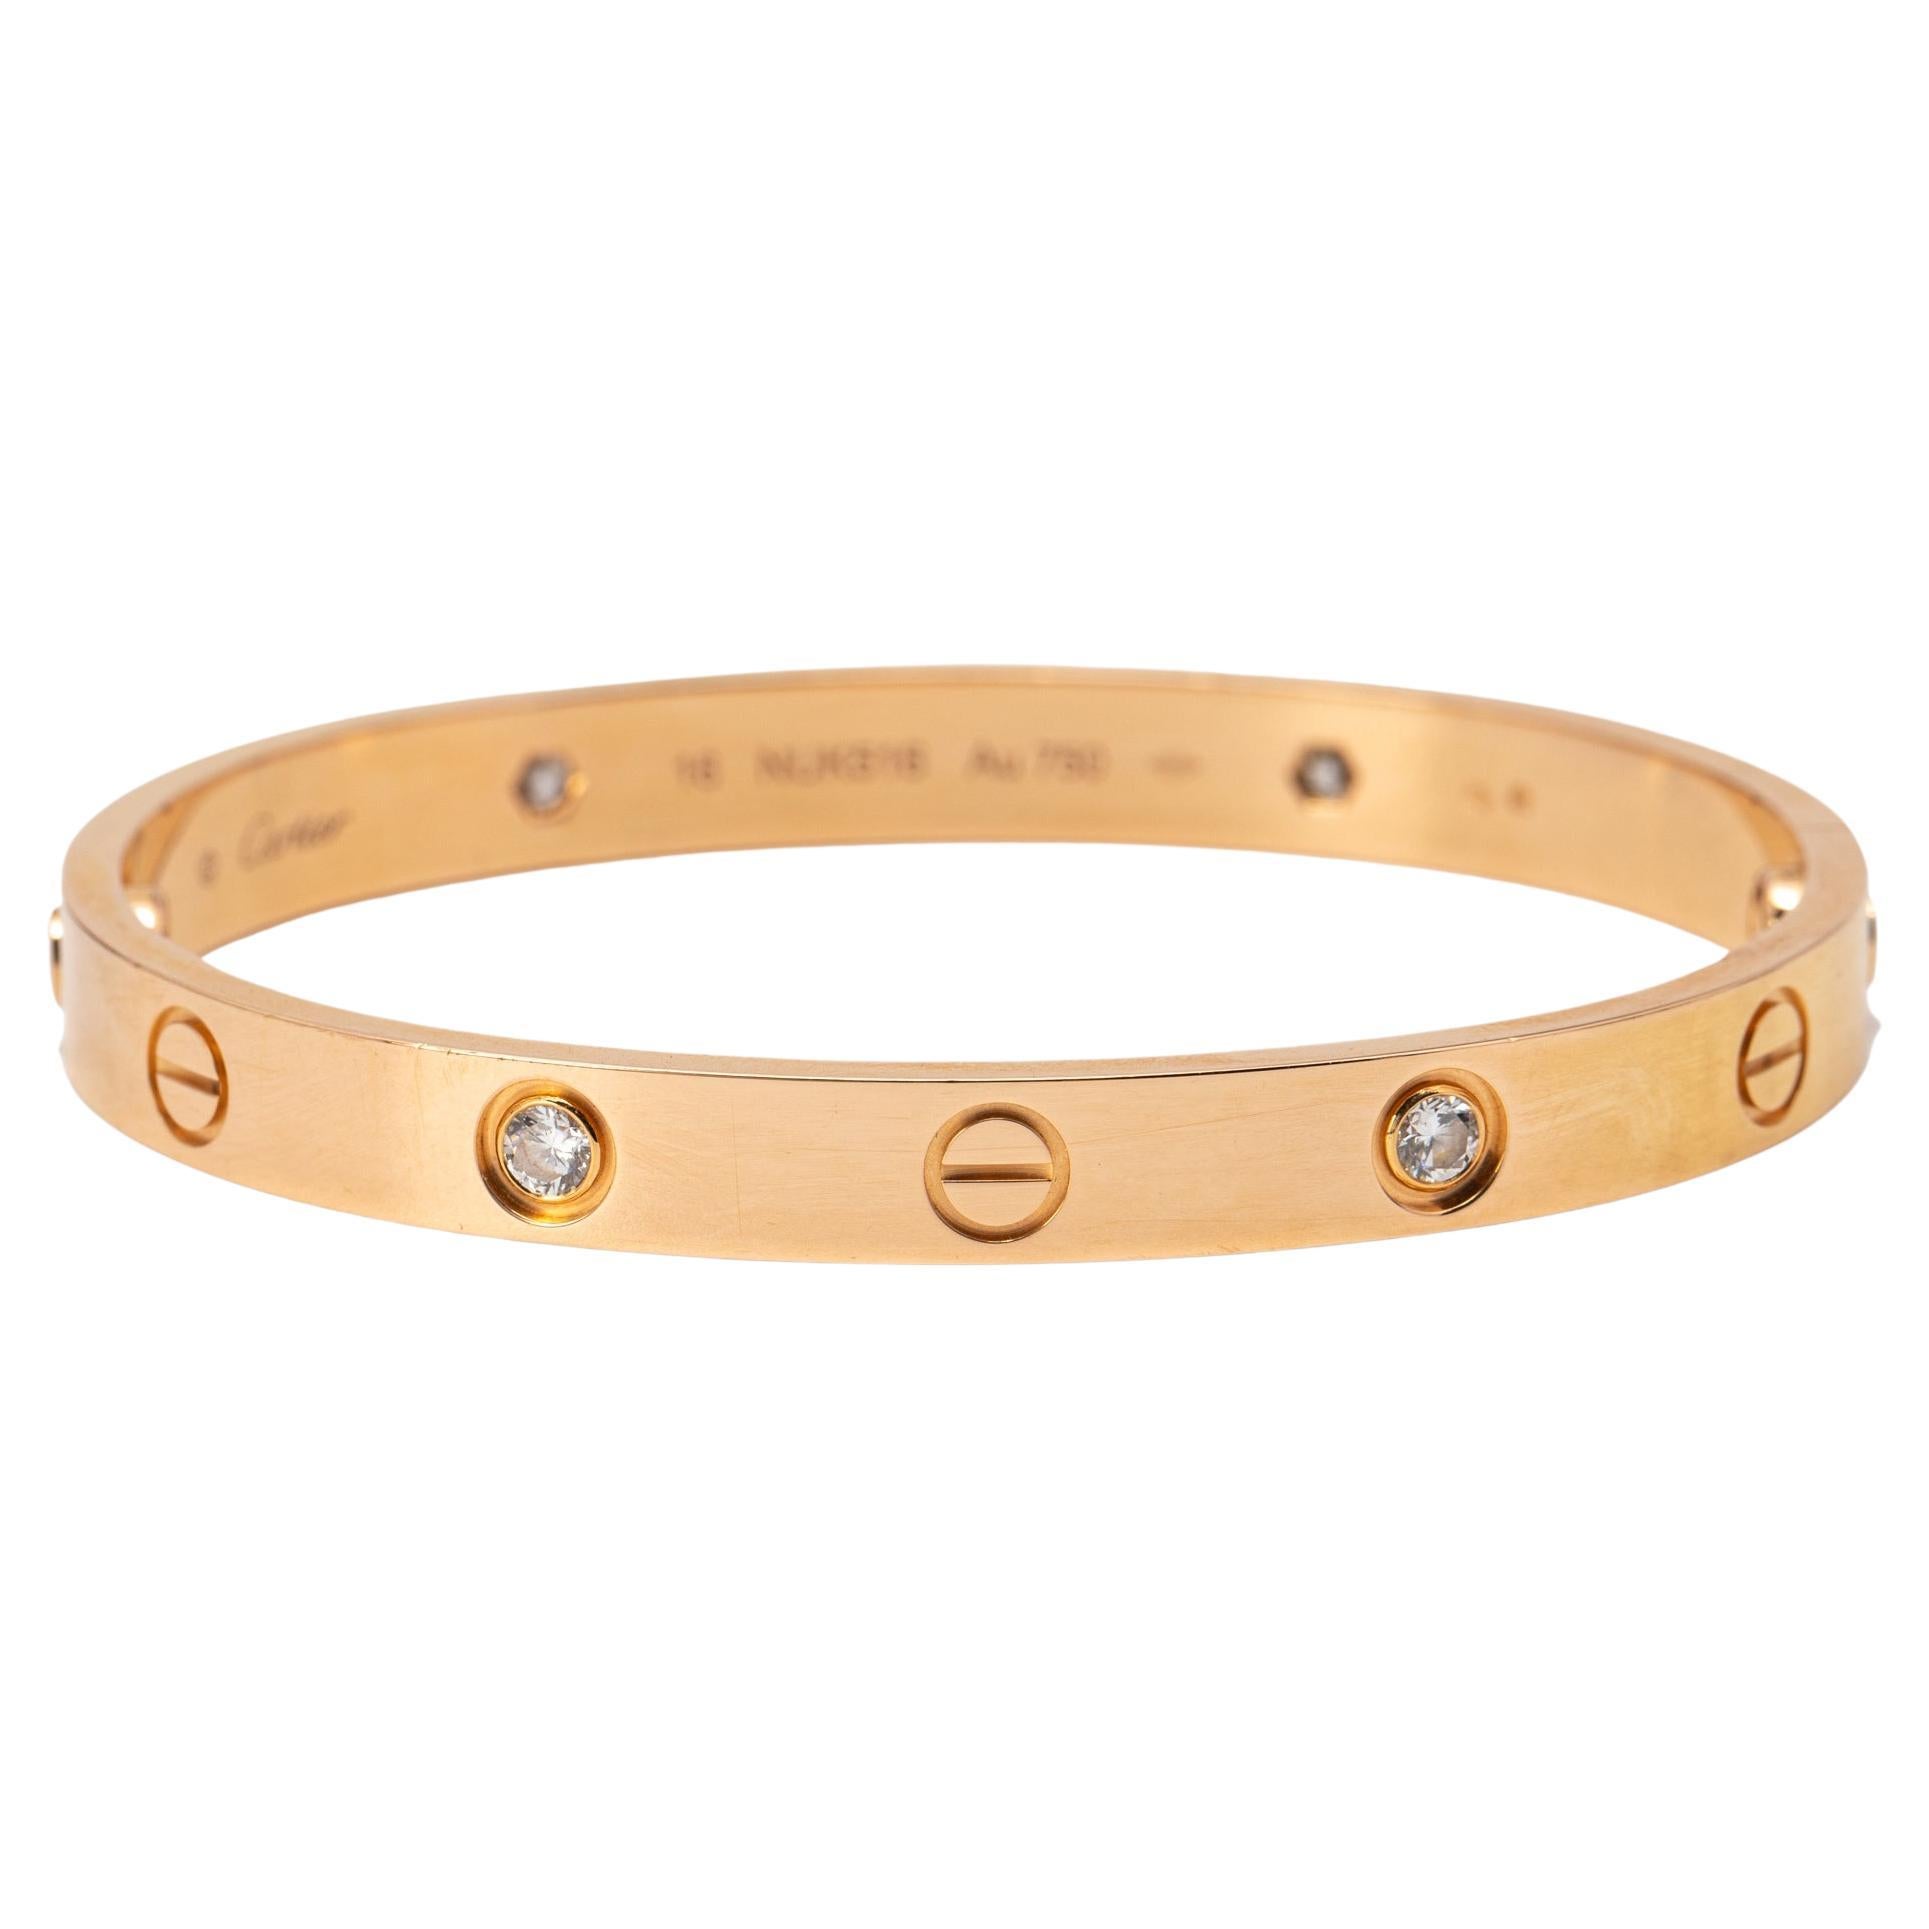 Cartier Small Love Bracelet with 6 Diamonds in 18k Rose Gold Size 15 ...